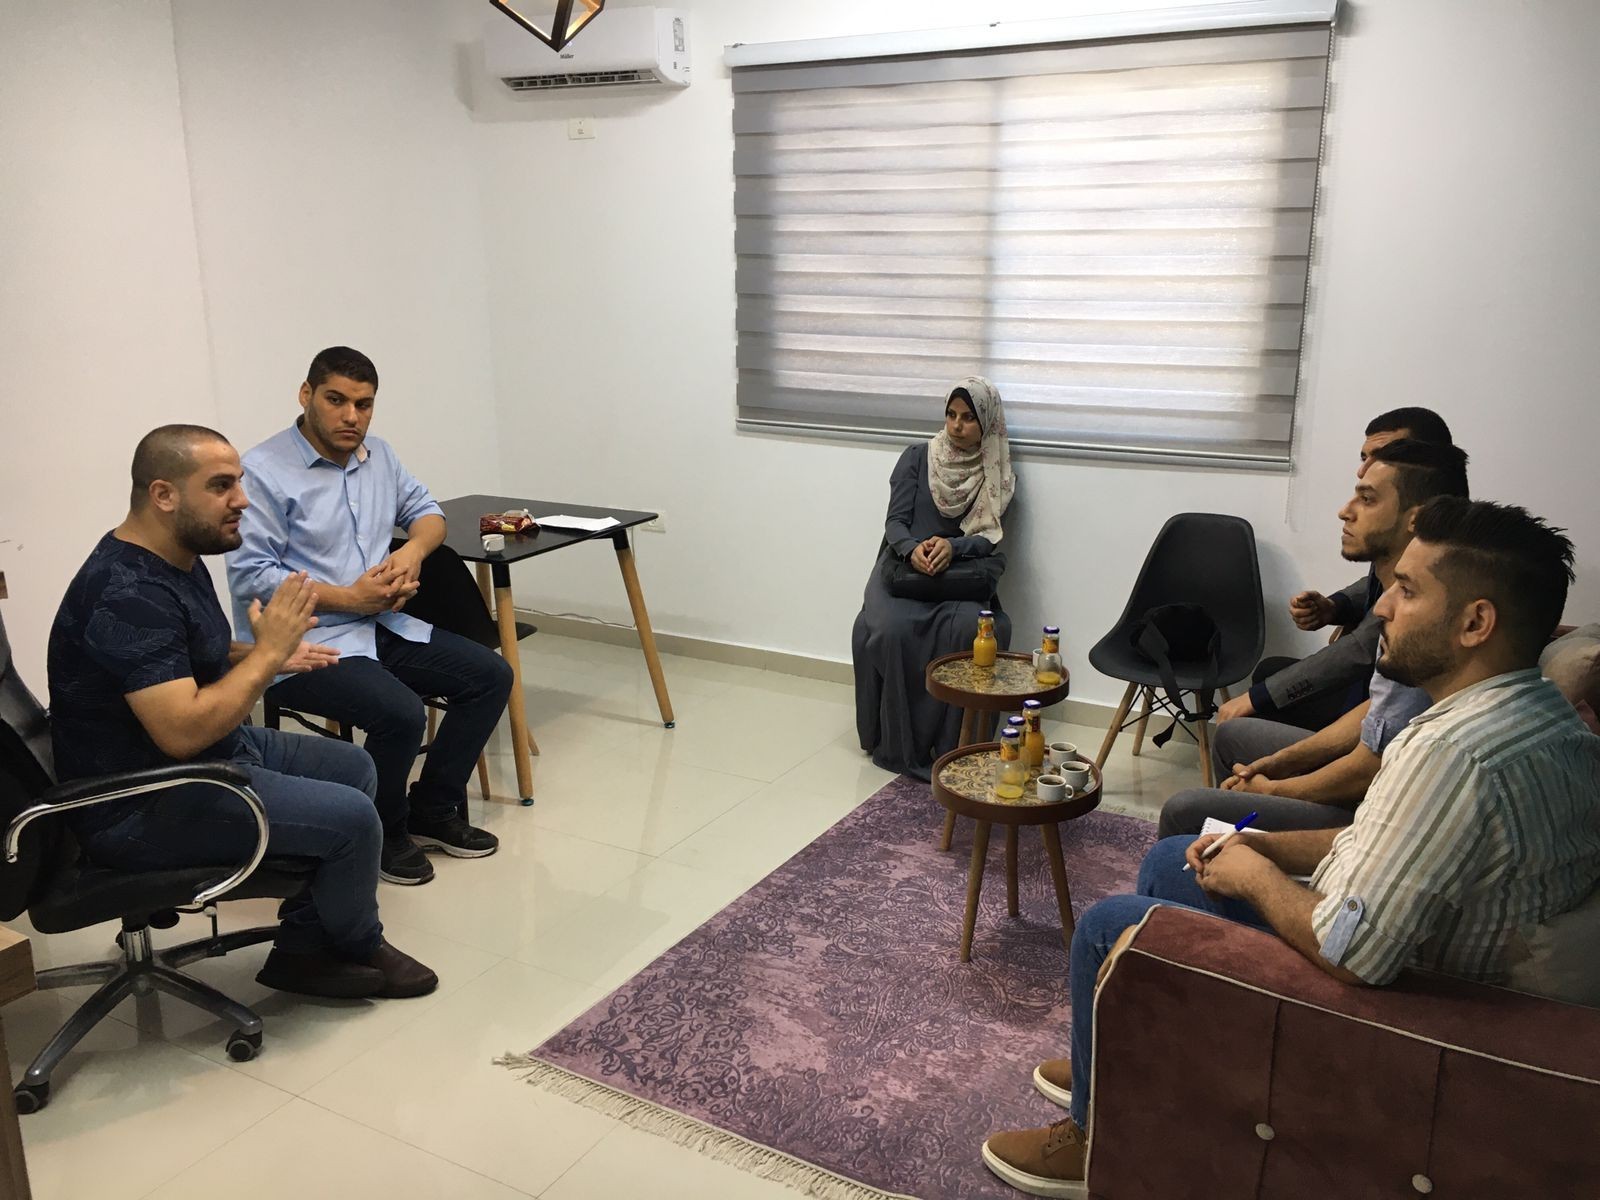 The Legal Protection Unit for Journalists implements field visits for institutions and media companies in the Gaza